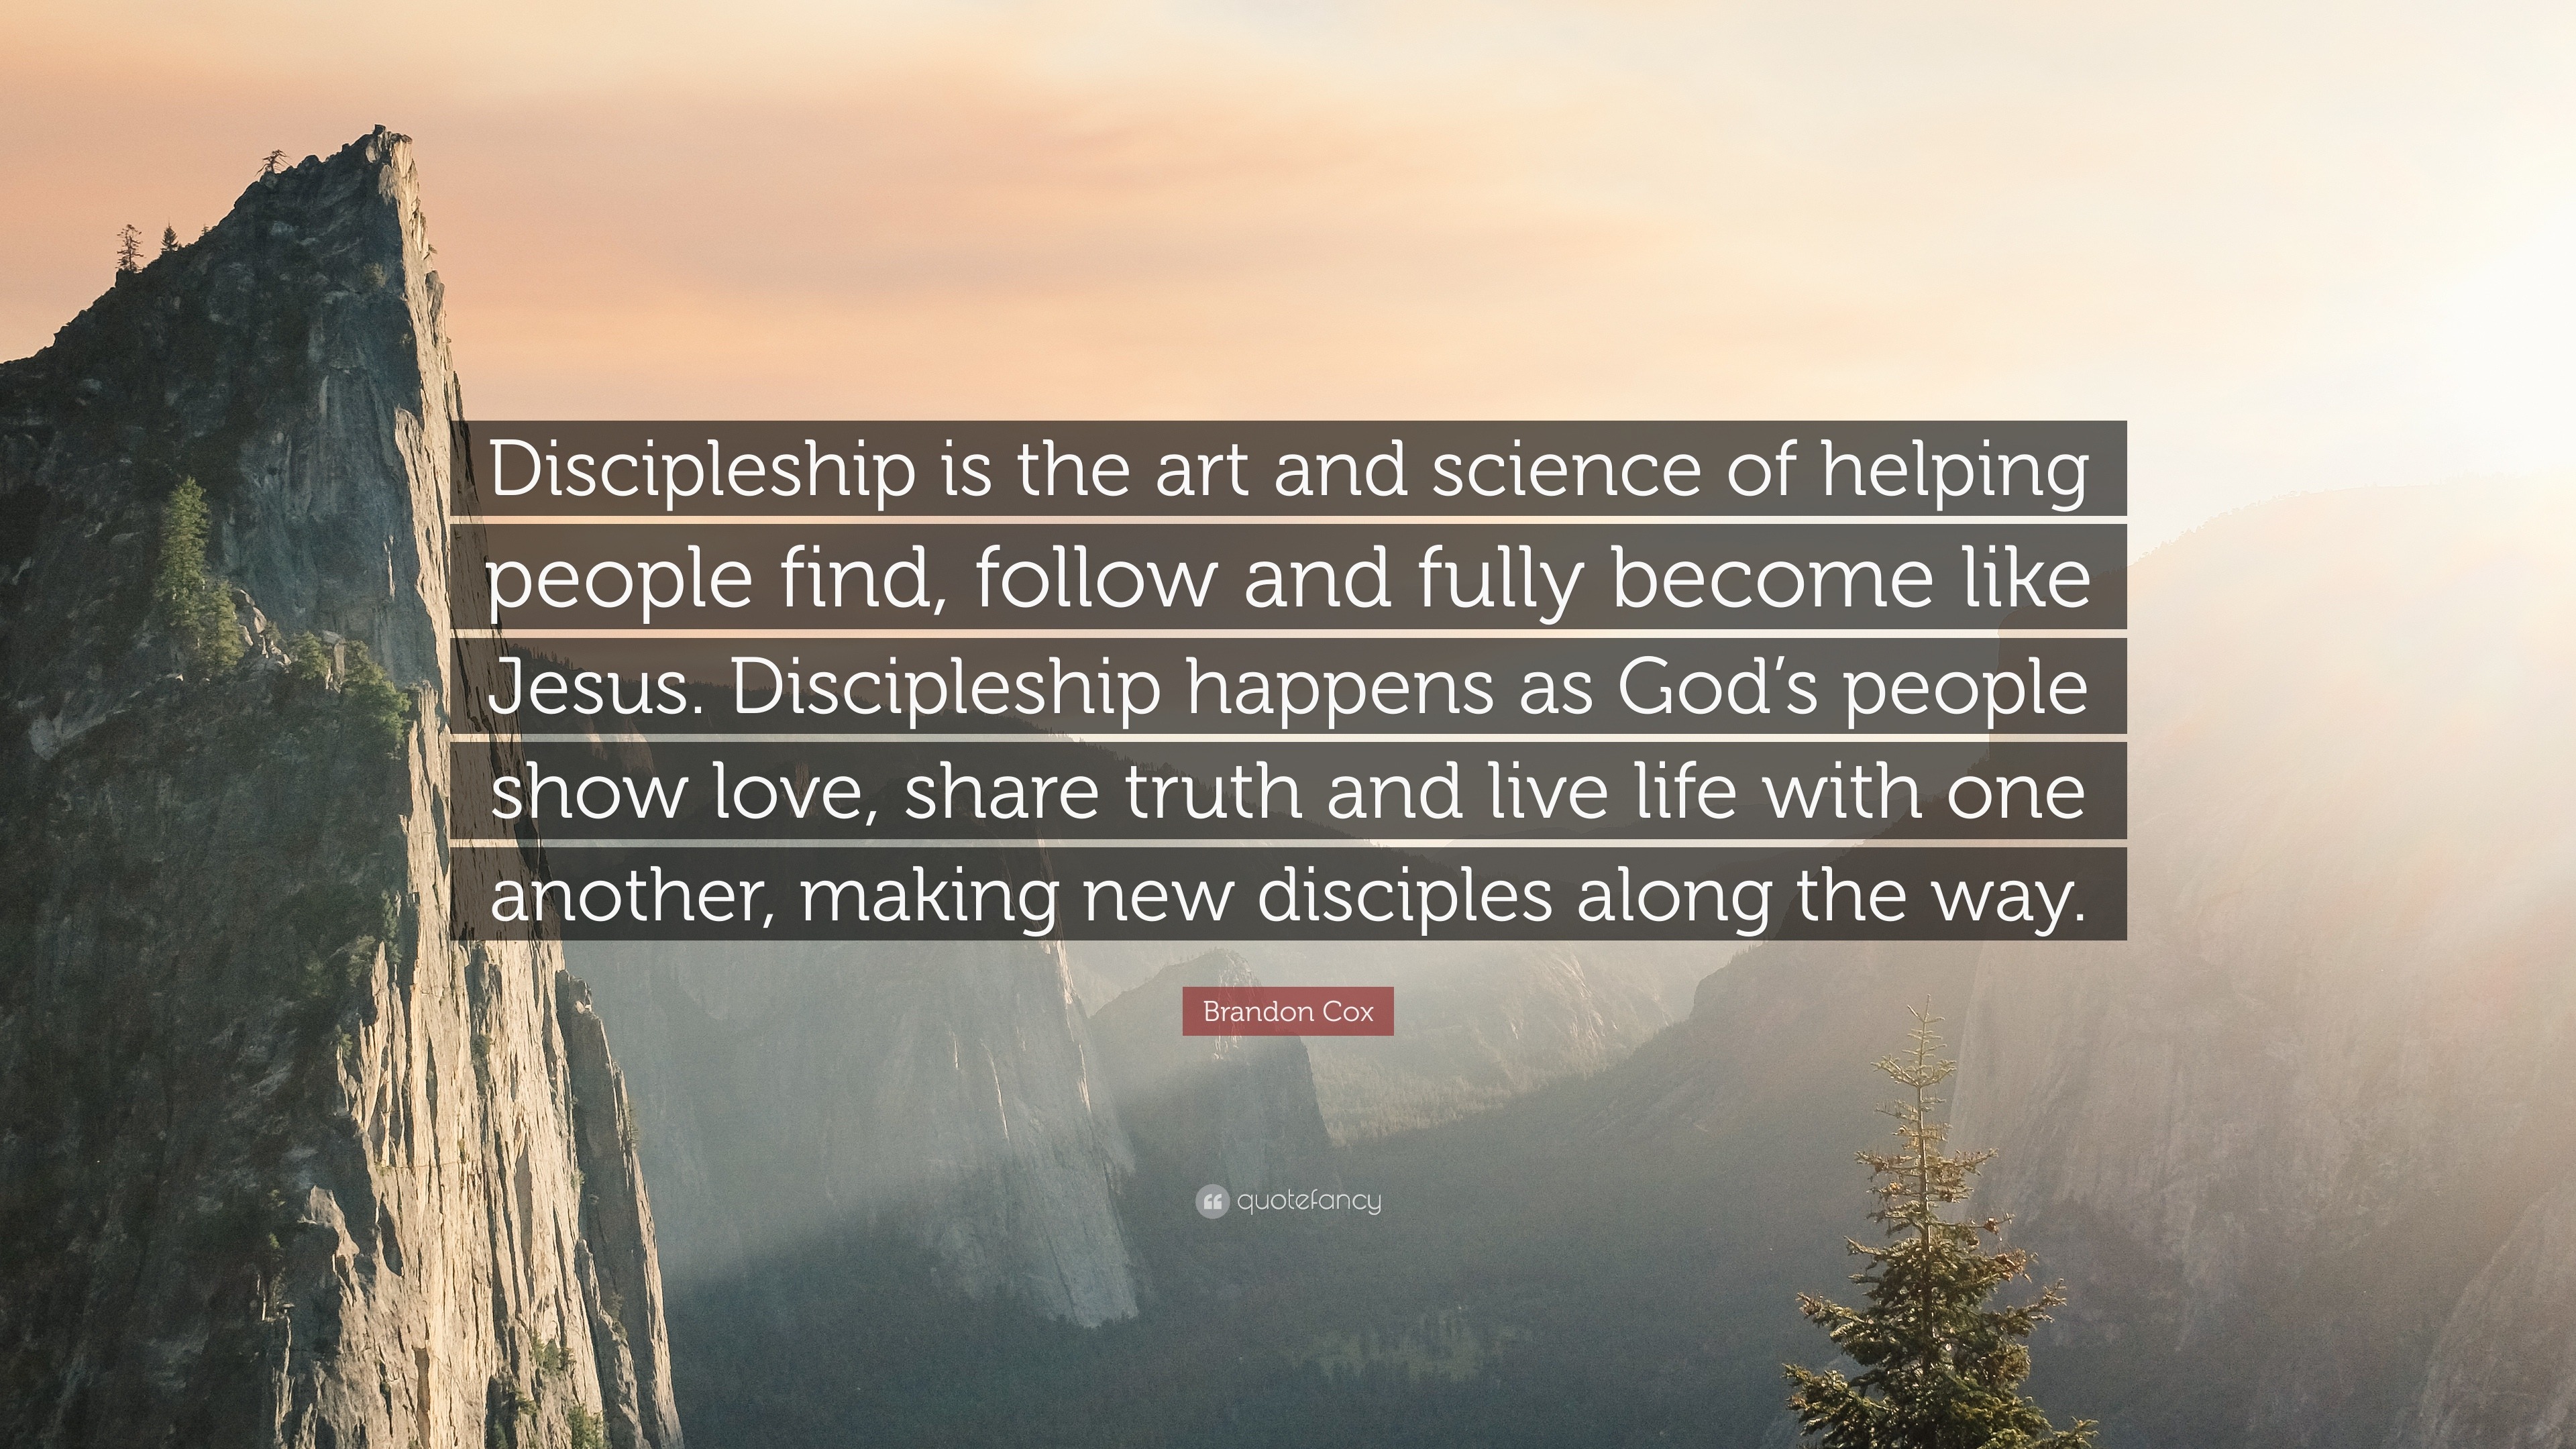 Brandon Cox Quote “Discipleship is the art and science of helping